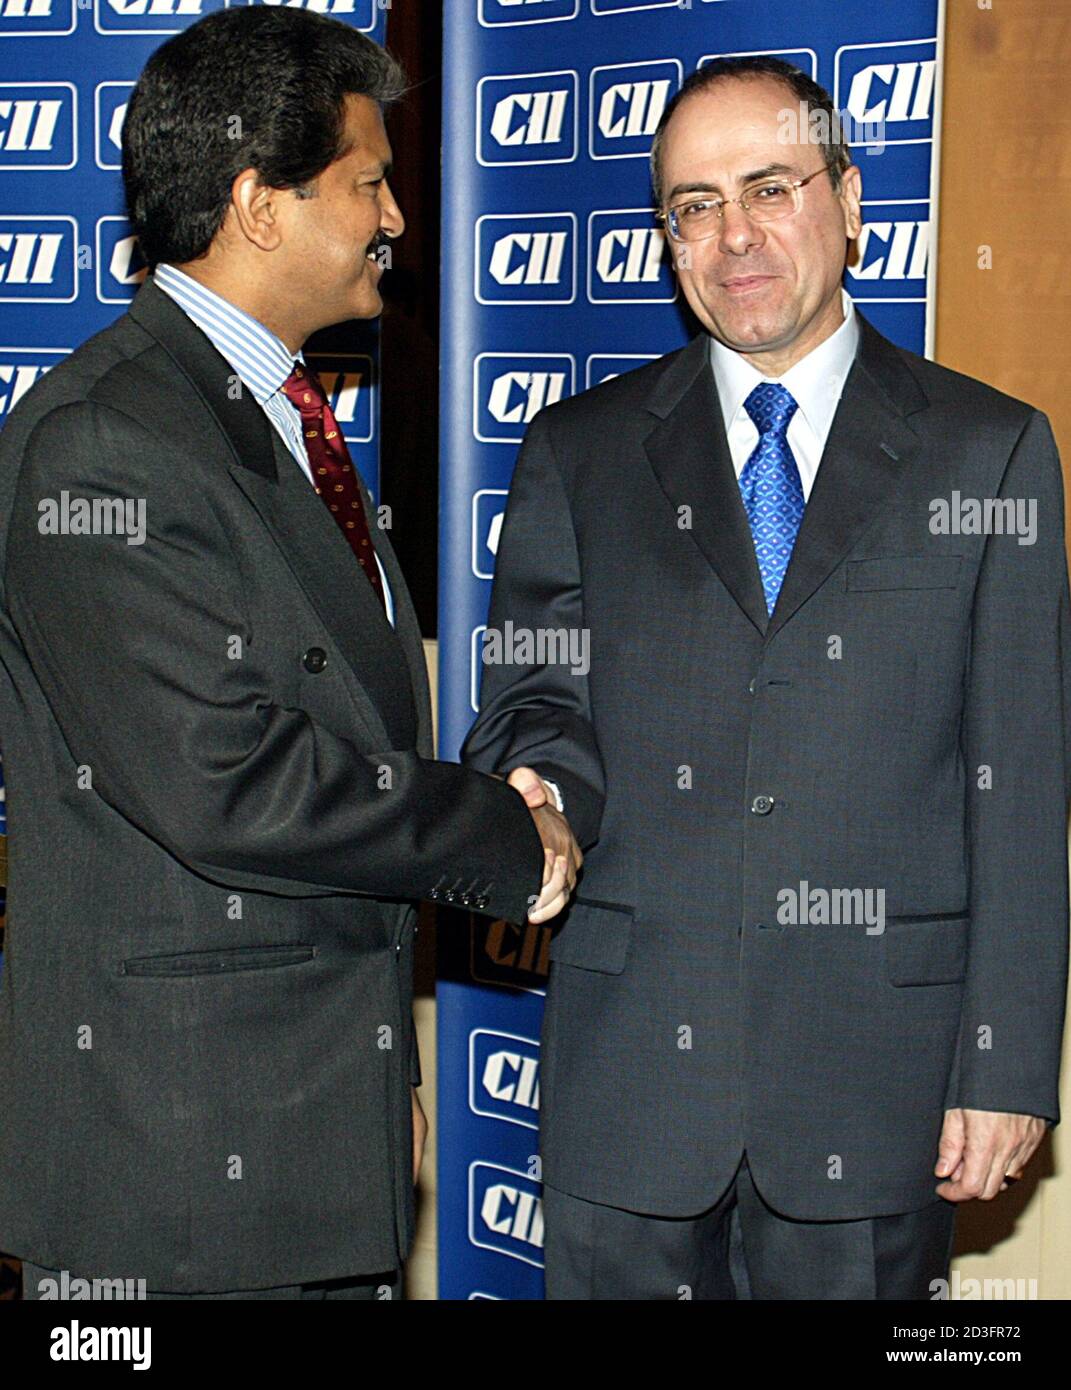 Foreign Minister of Israel, Silvan Shalom (R), and president of Confederation of Indian Industry CII, Anand Mahendra, meet during Shalom's meeting with Indian industrialists in Bombay on February 9, 2004. Shalom is on a five-day visit to India to discuss bilateral and regional matters. Israel is likely to sign a $1.1 billion defence deal with India shortly, an Israeli defence industry executive had earlier said on Sunday. REUTERS/Punit Paranjpe  AD/BM Stock Photo